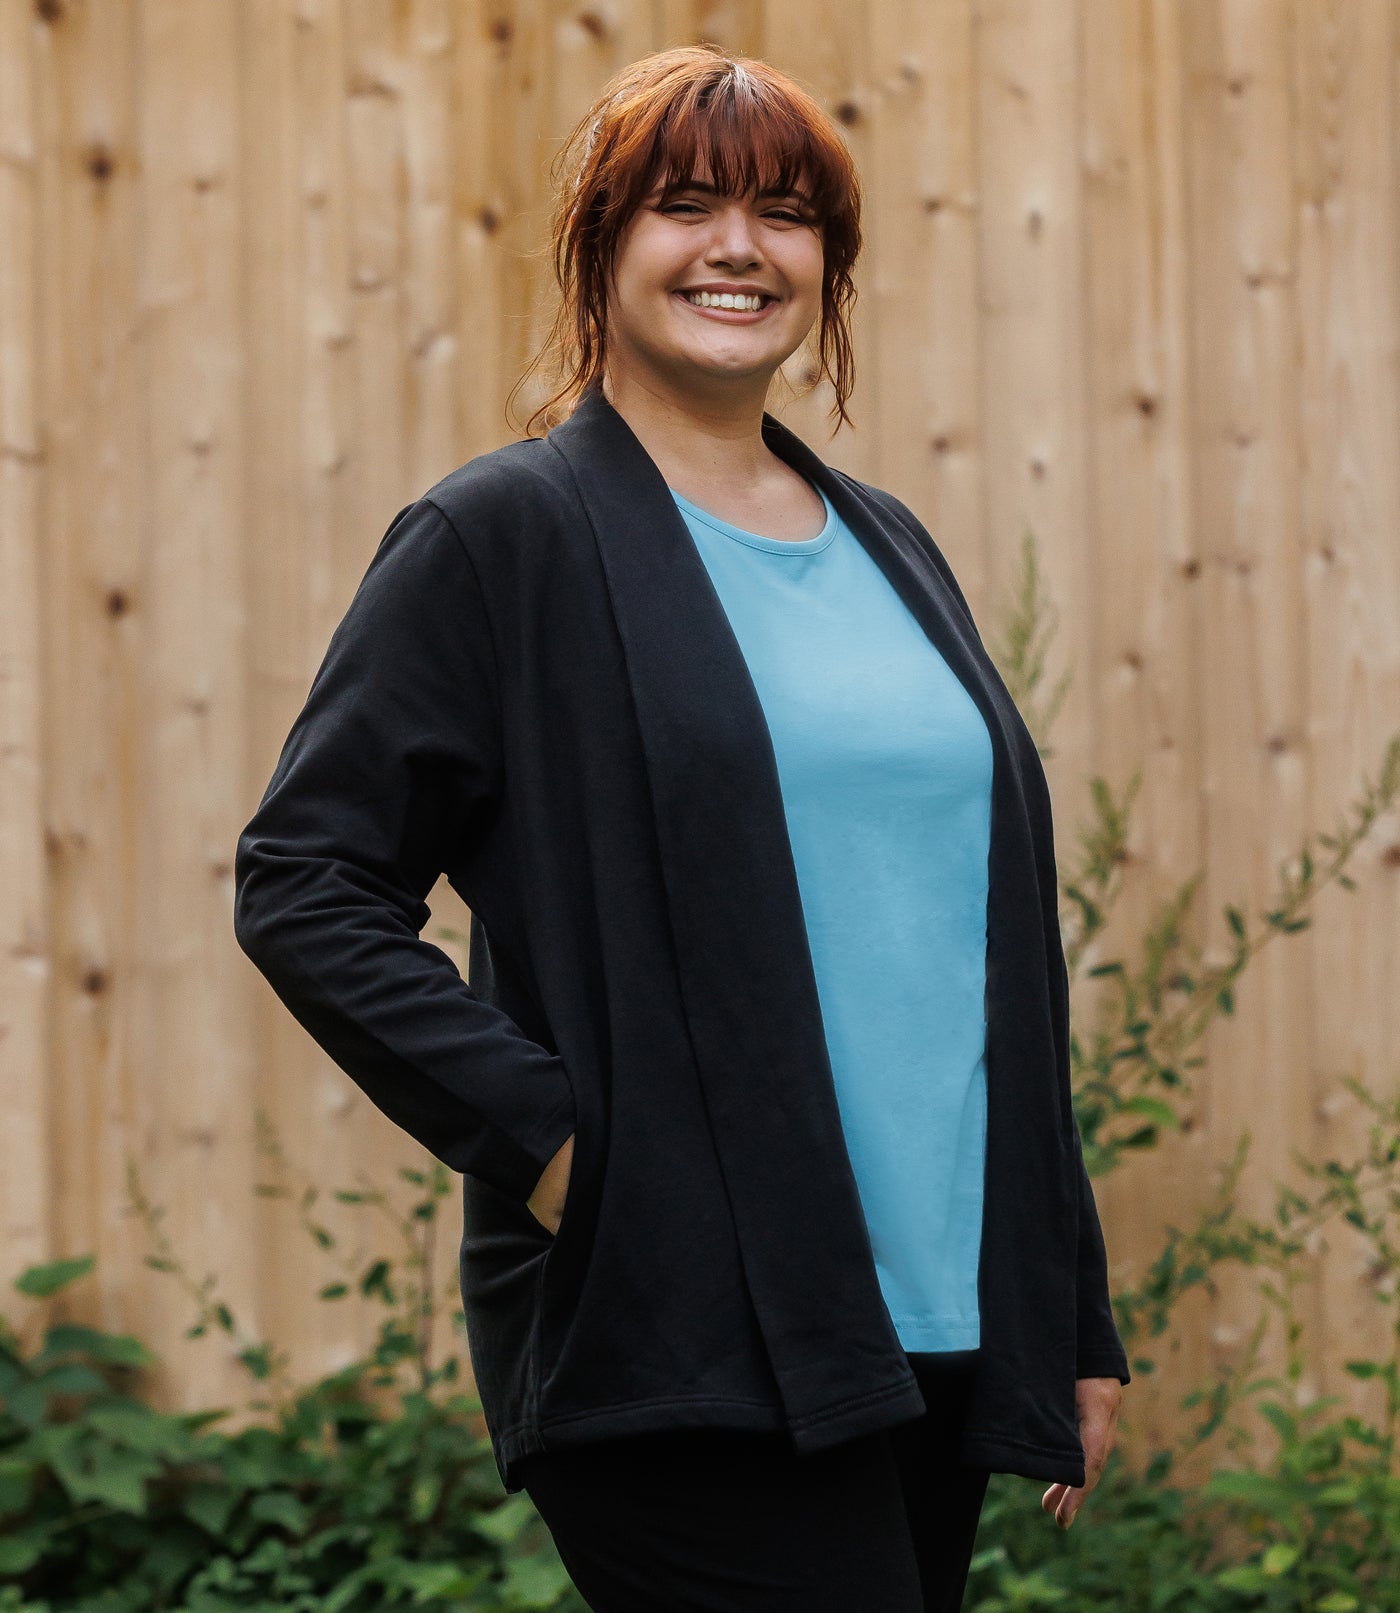 Plus-size model, facing forward, wearing JunoActive's Mavie Cotton Wrap Jacket in color black. Her right hand is in her pocket of jacket and left hand hanging by her side. 